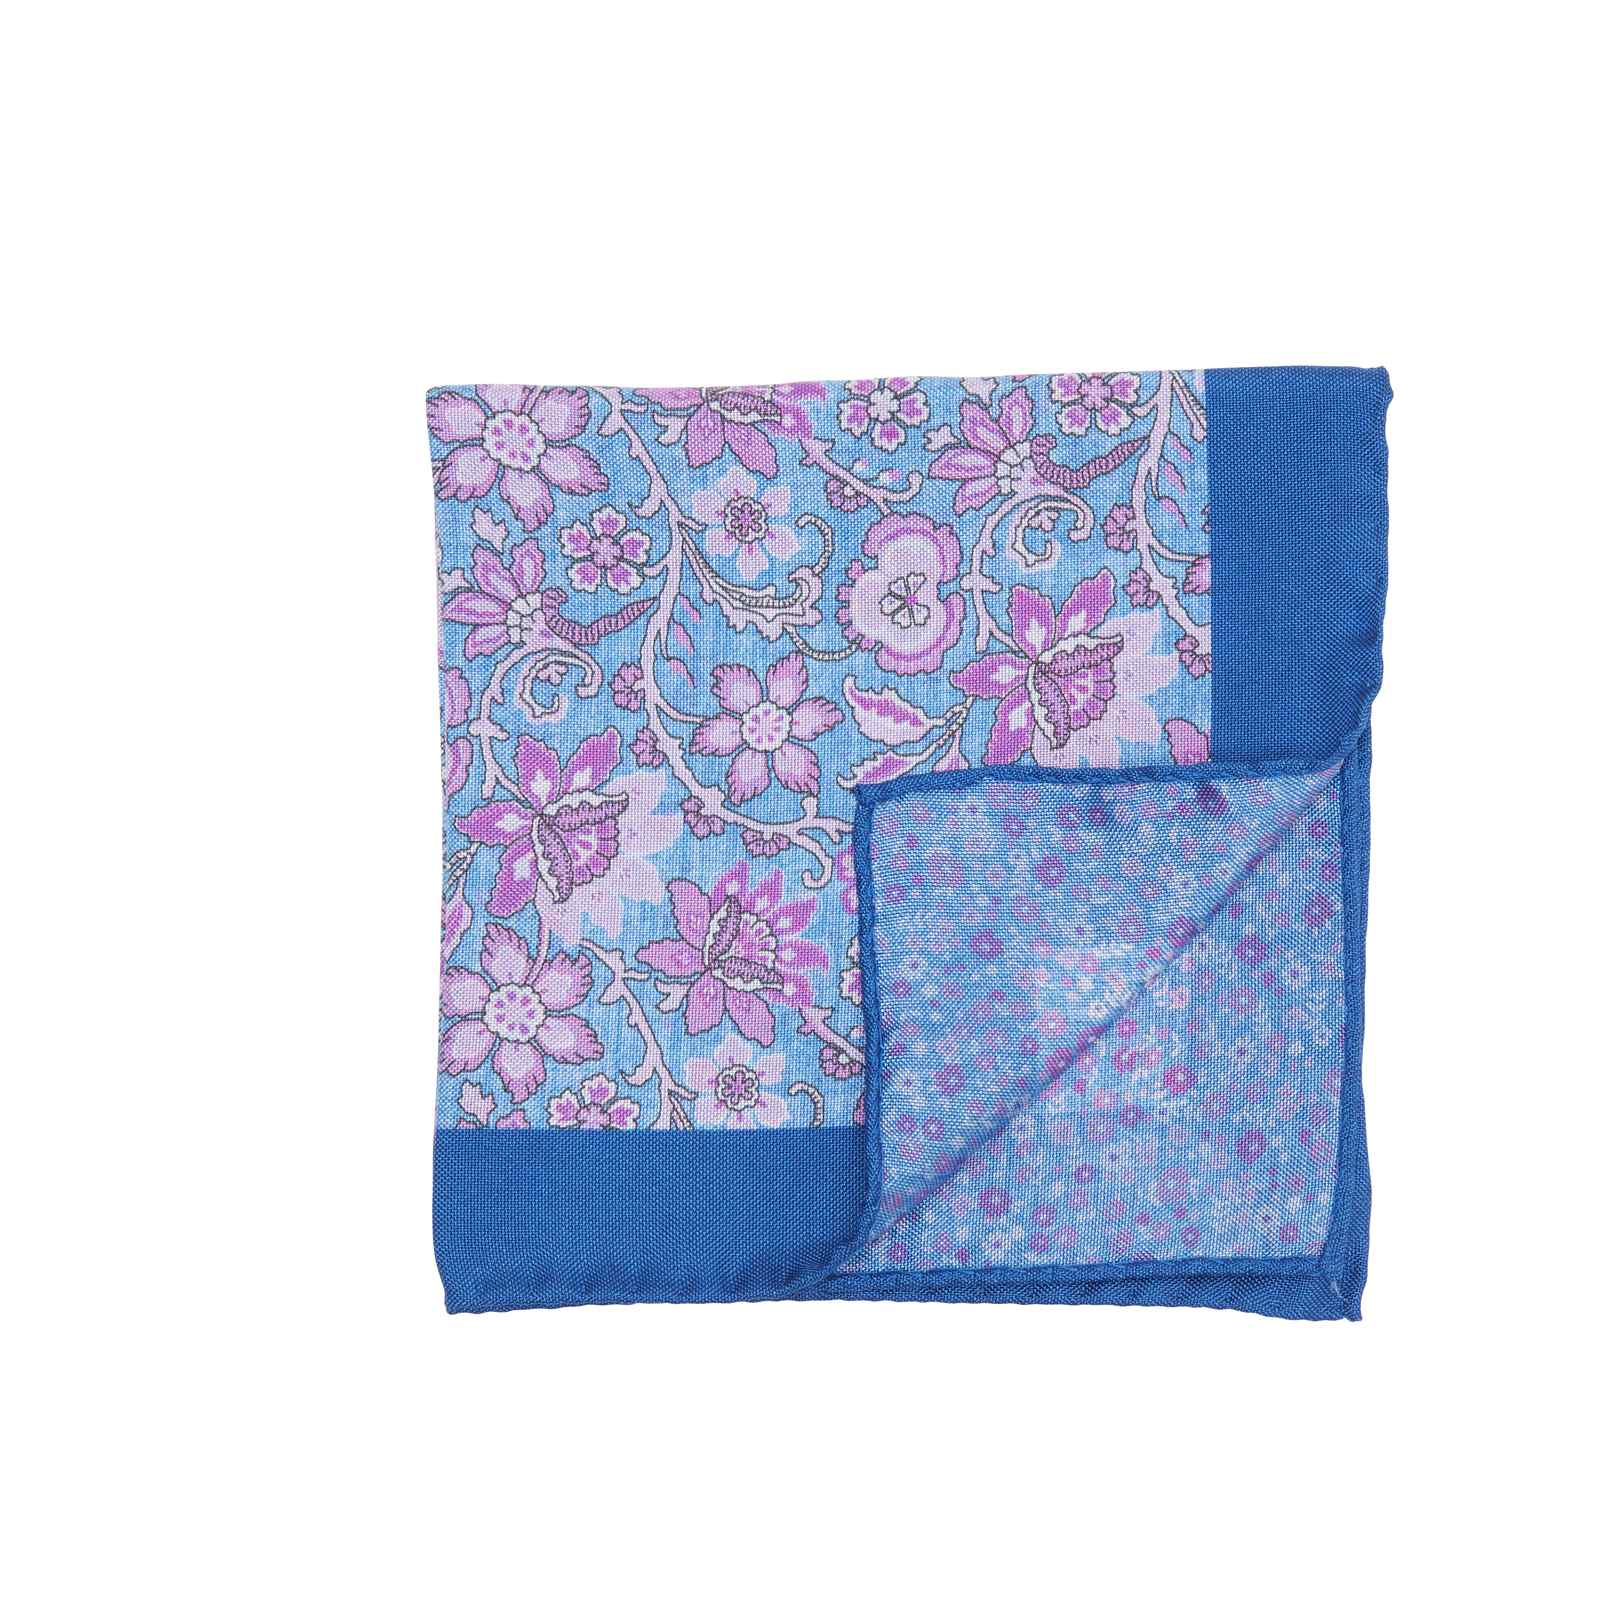 Blue and Pink Double Sided Pocket Square w/ Large and Small Flowers